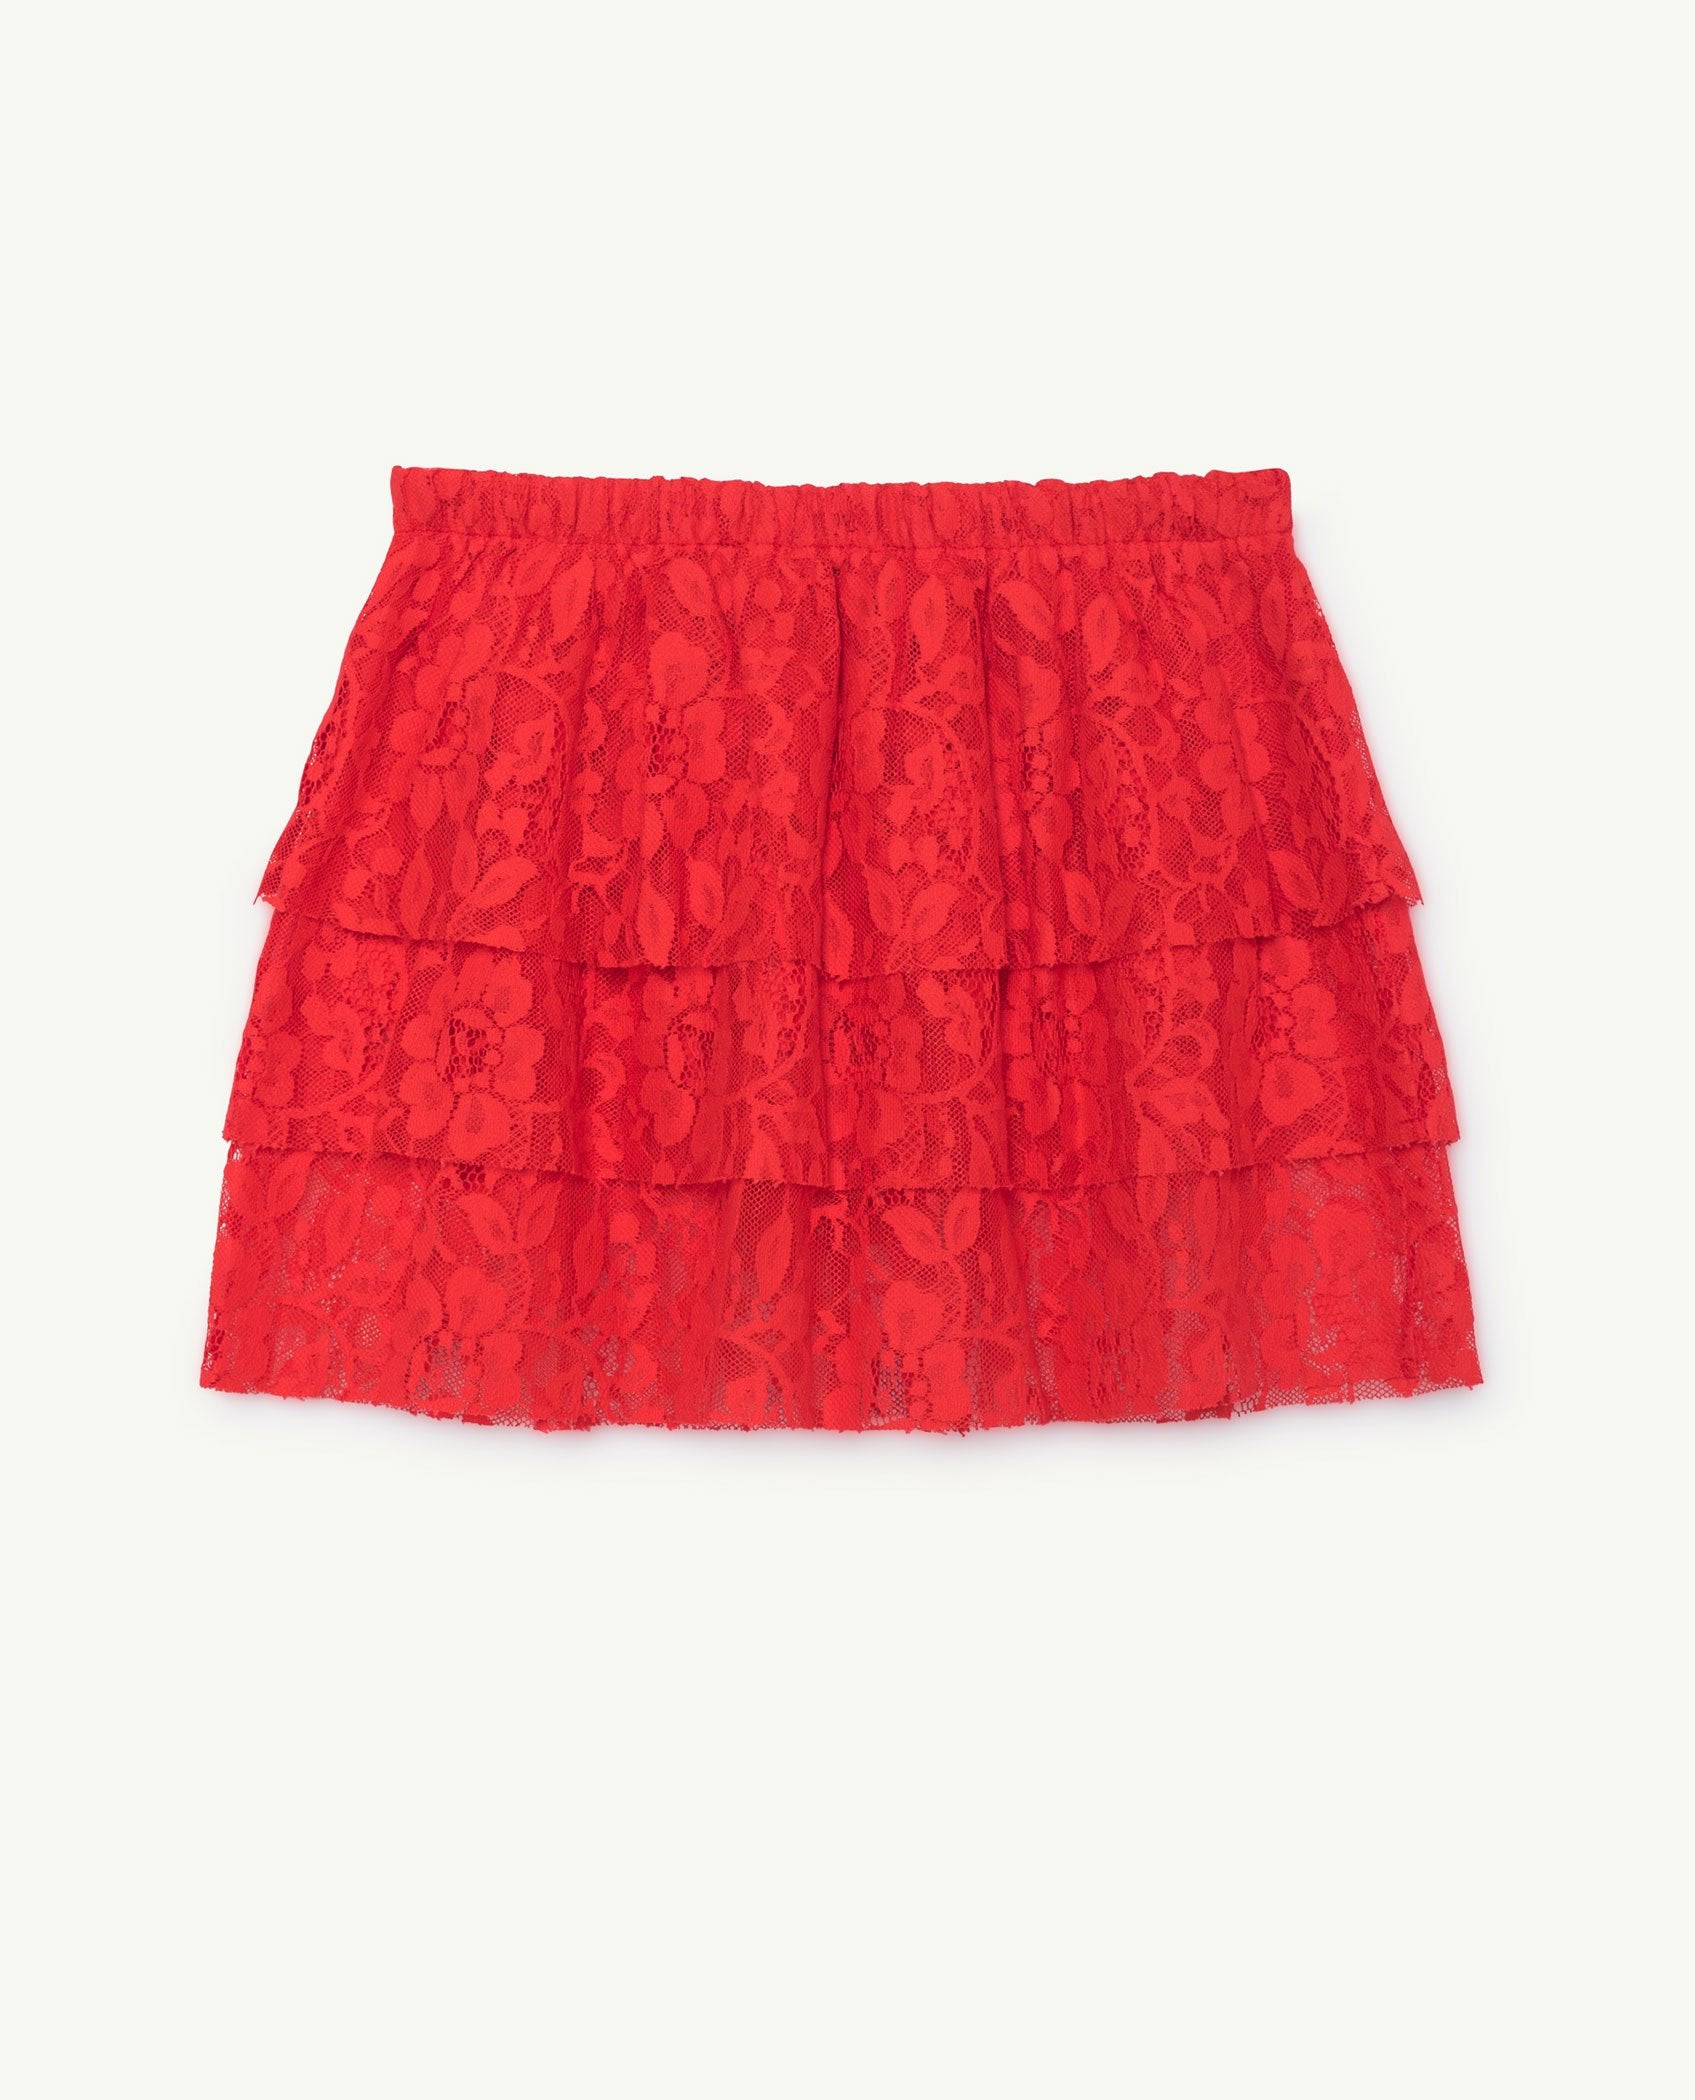 Red Turkey Skirt PRODUCT BACK